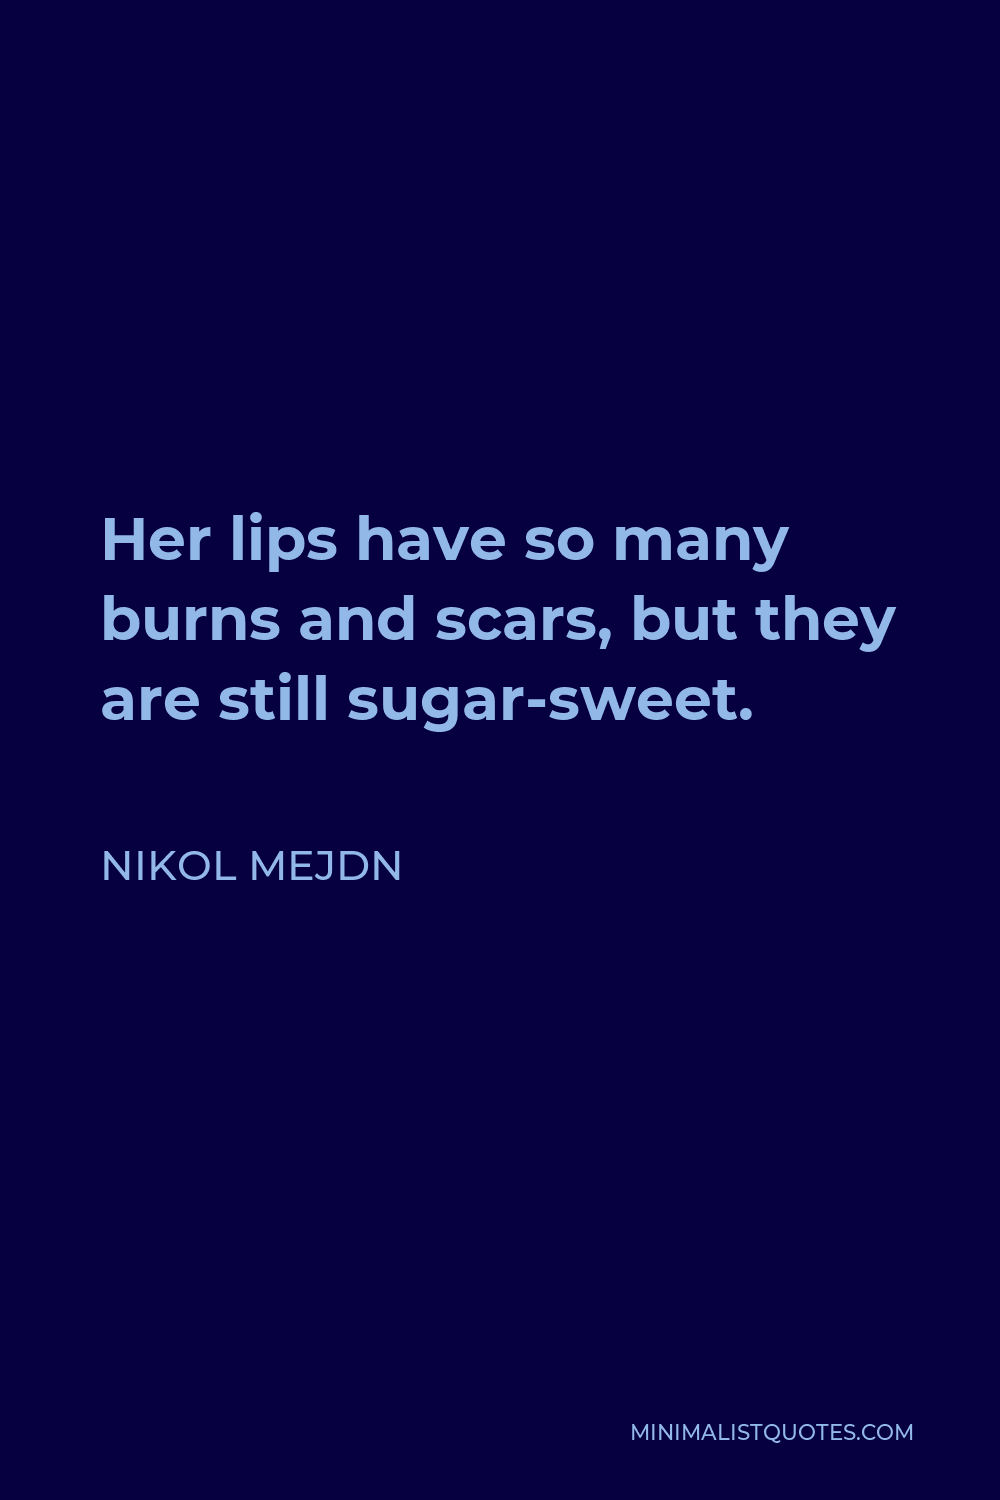 Nikol Mejdn Quote - Her lips have so many burns and scars, but they are still sugar-sweet.